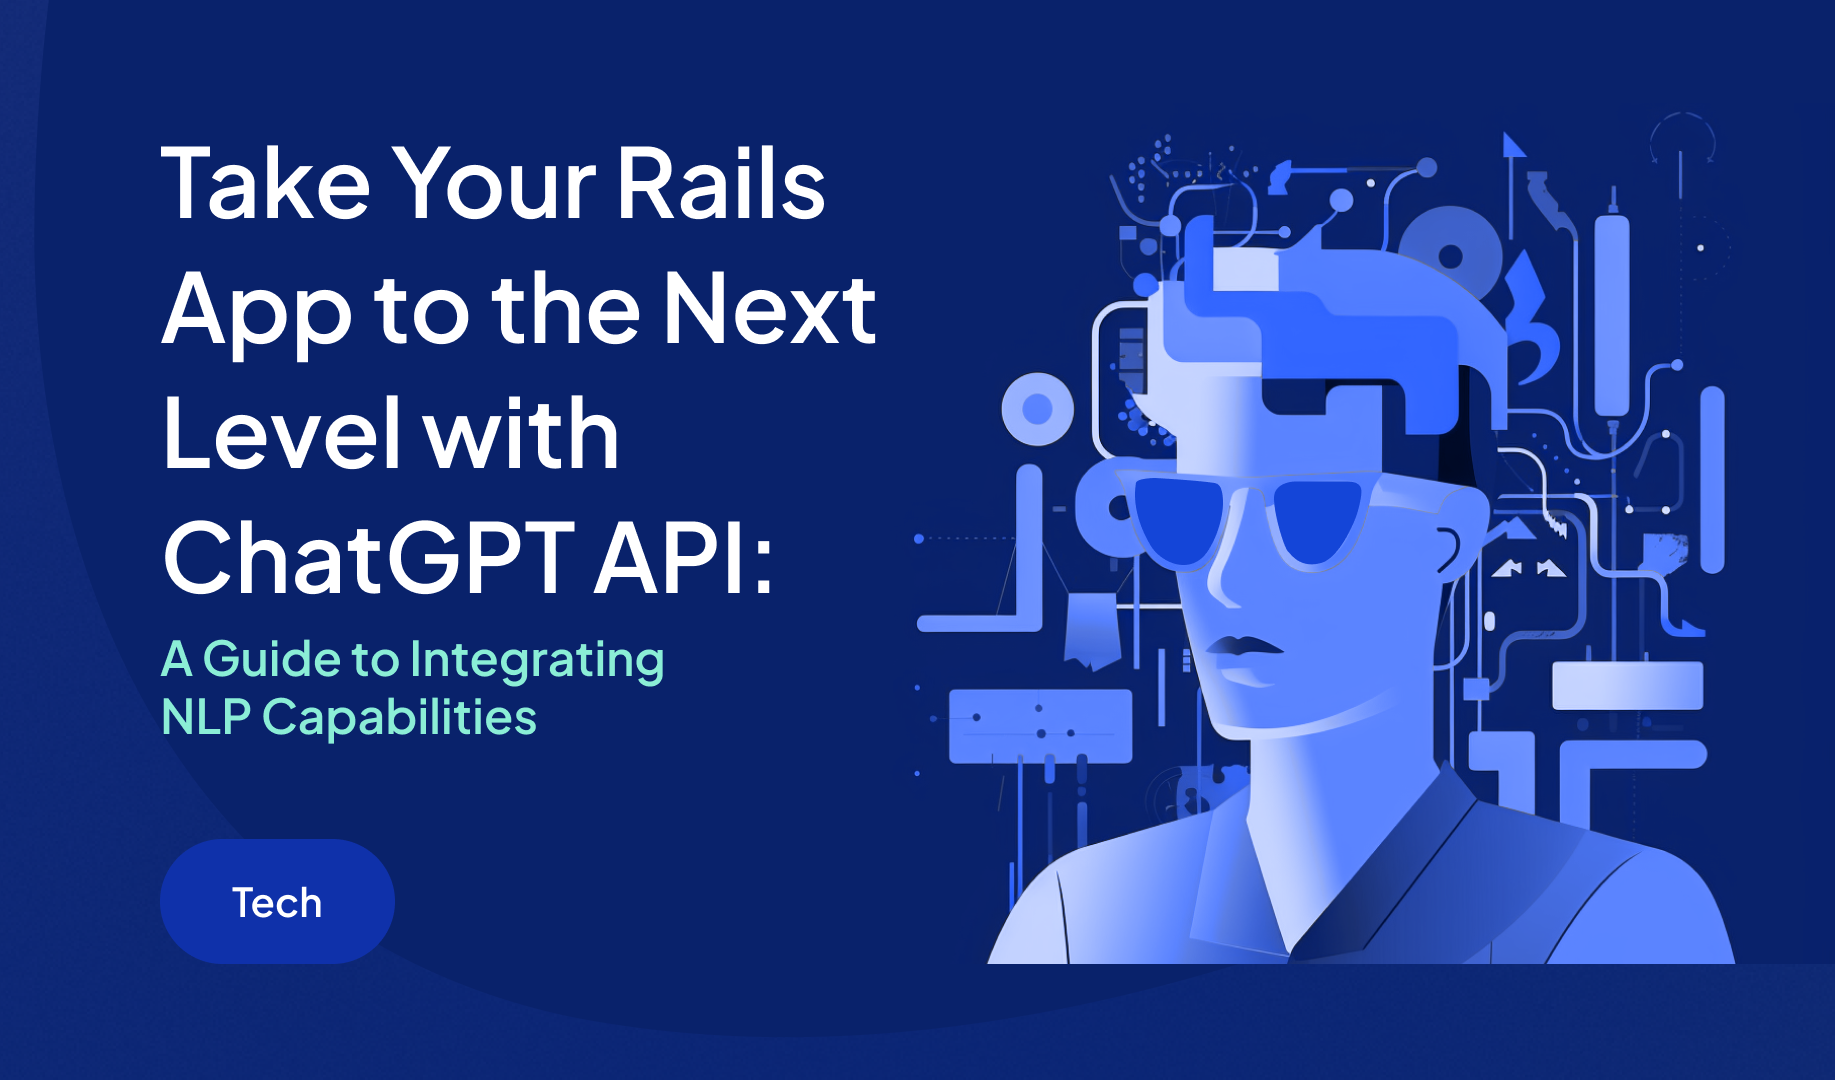 Take Your Rails App to the Next Level with ChatGPT API: A Guide to Integrating NLP Capabilities